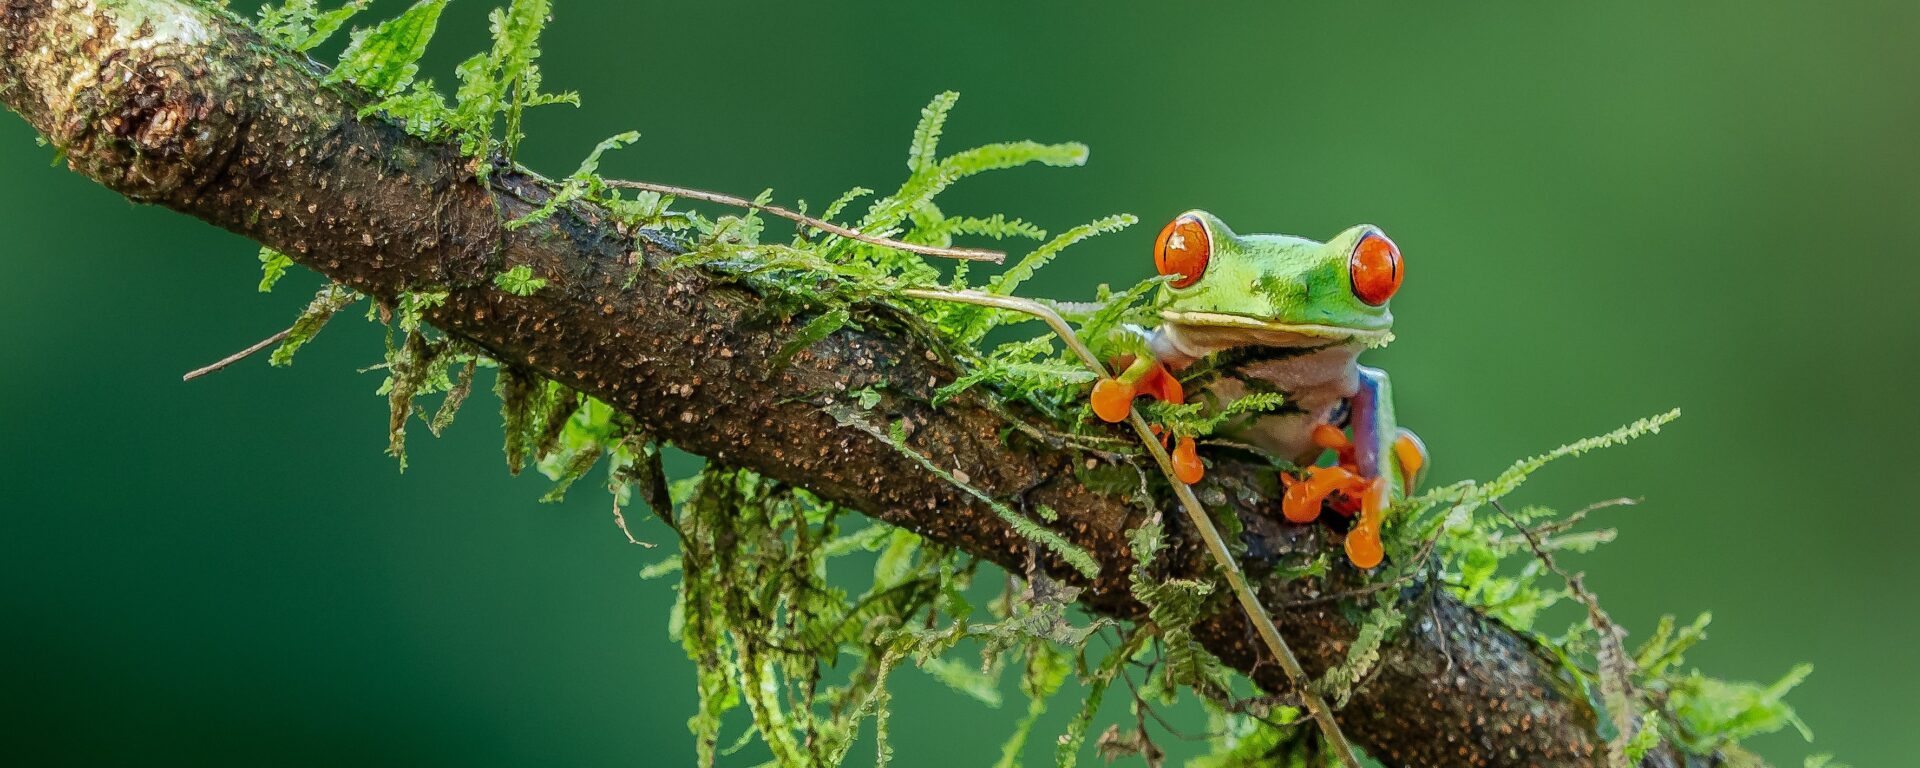 Costa Rican tree frog on a branch